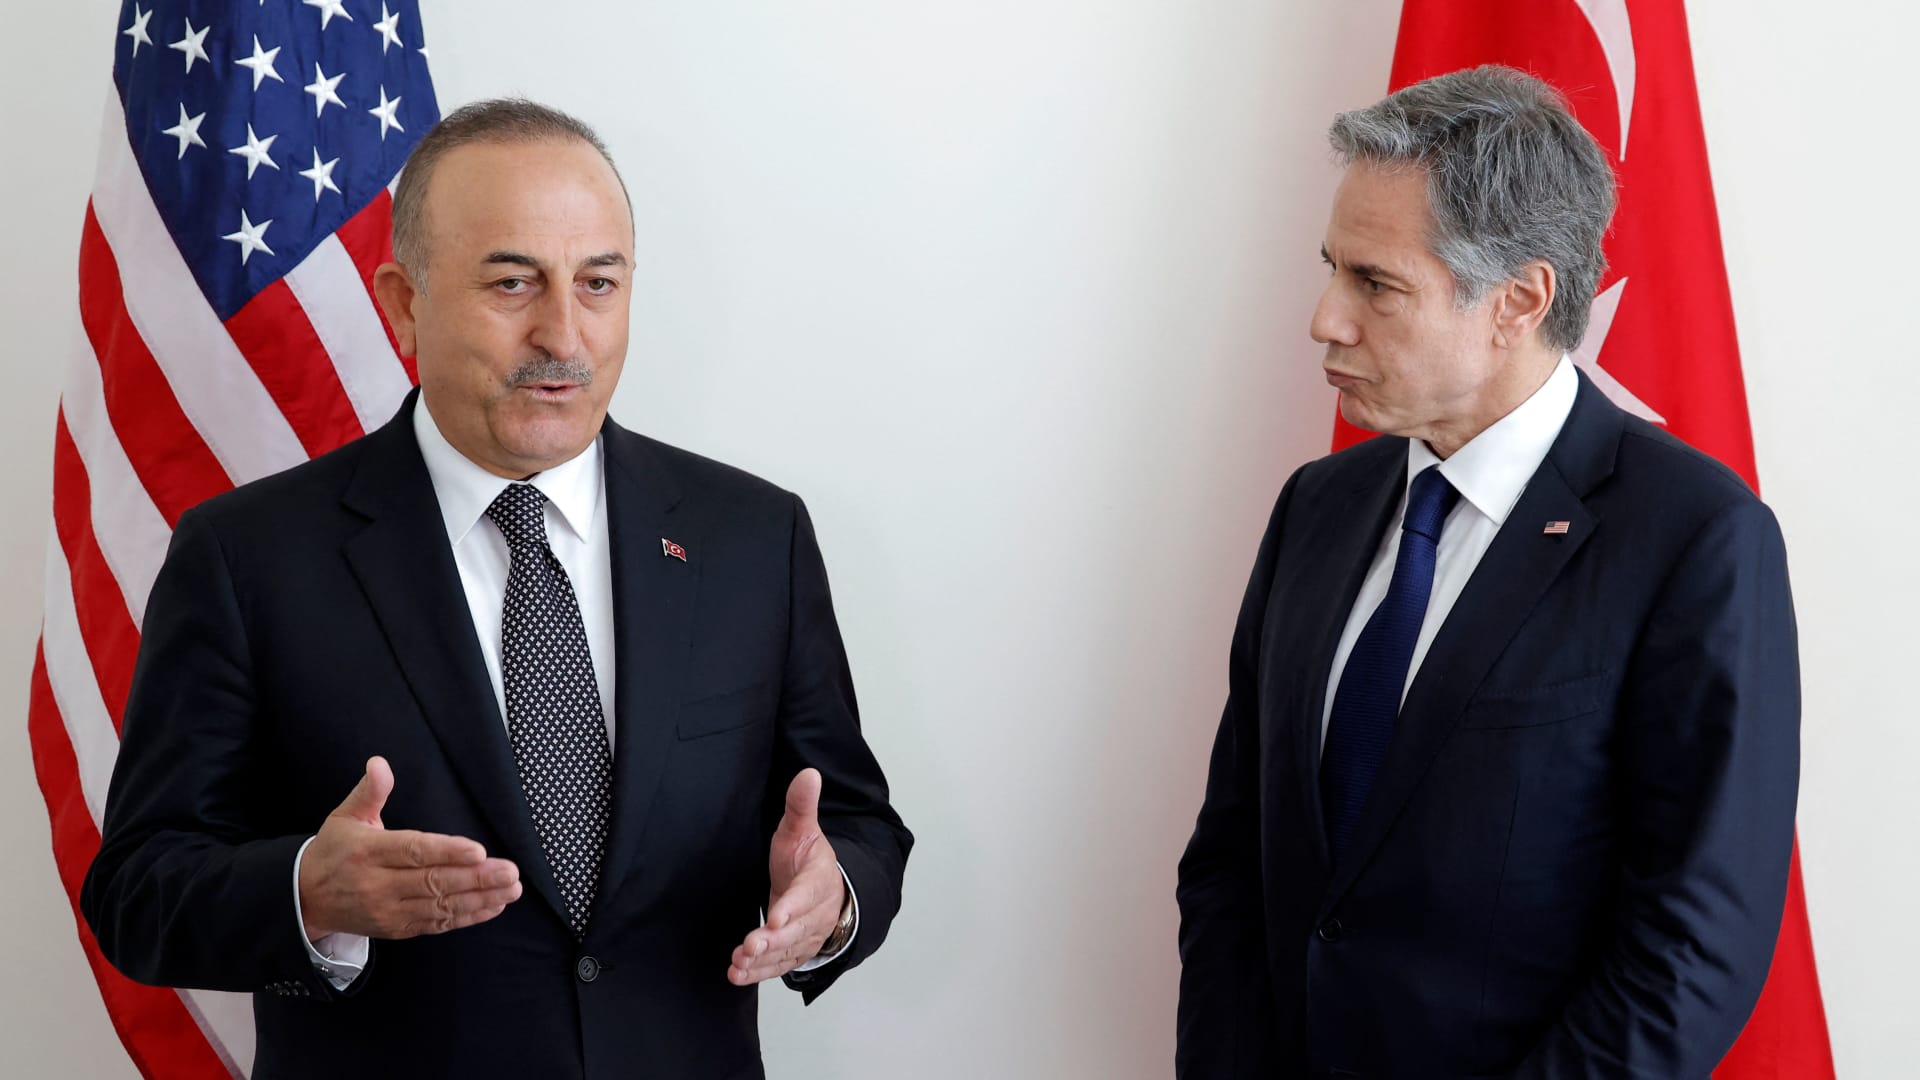 US Secretary of State Antony Blinken meets with Turkish Foreign Minister Mevlut Cavusoglu at UN Headquarters in New York on May 18, 2022.